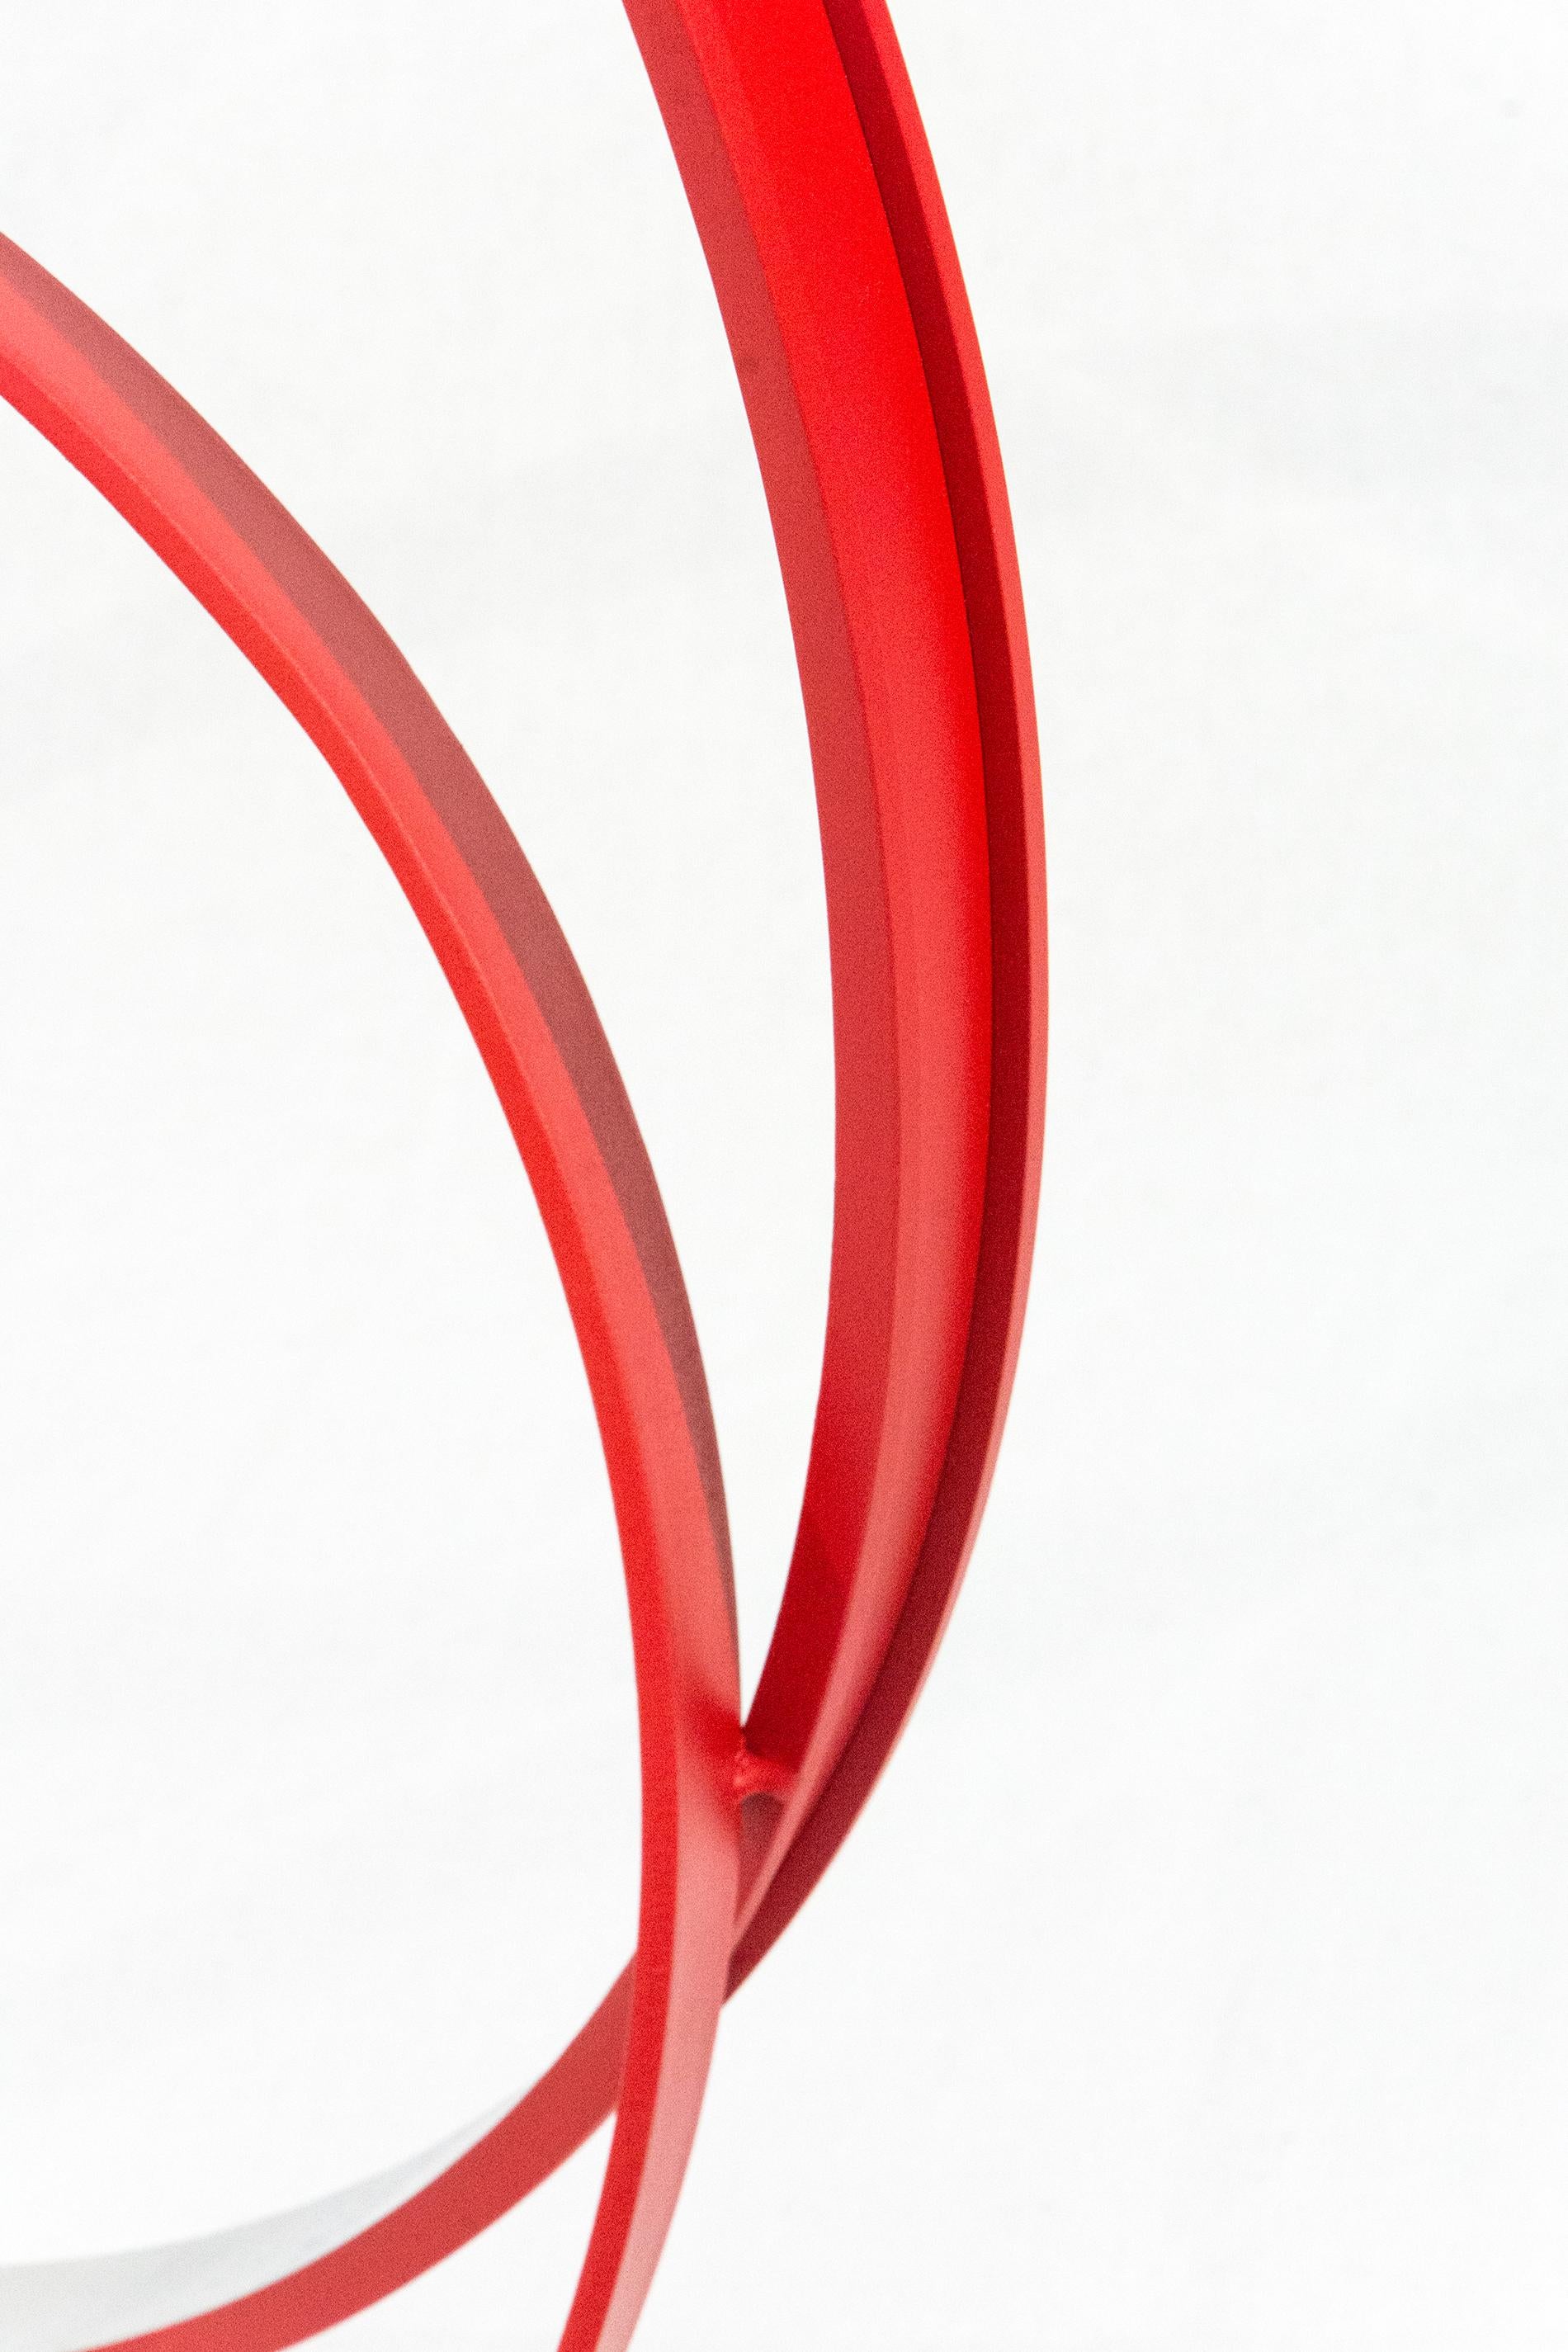 Large Red Temps Zero 2/10 - contemporary, large ring, stainless steel sculpture 1